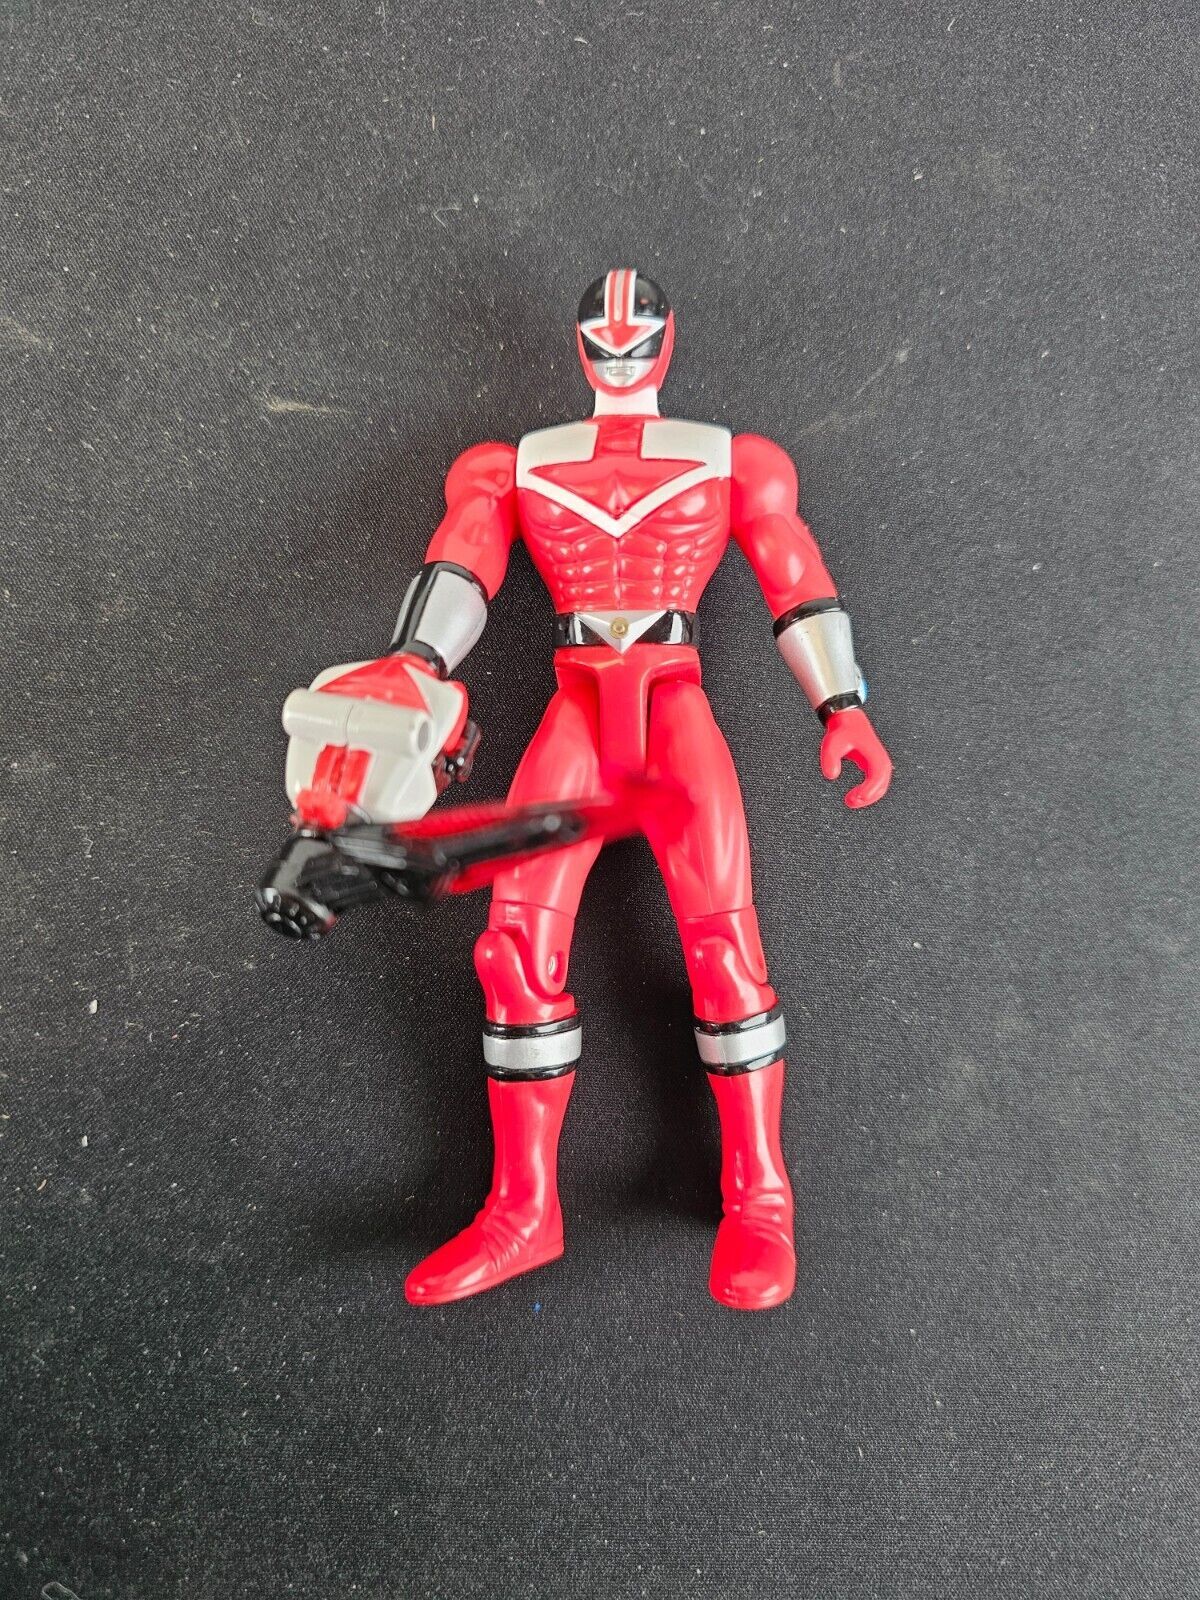 6" Power Rangers Time Force RED TF FIGHTER Action Figure Bandai Vintage 2000 - £3.92 GBP